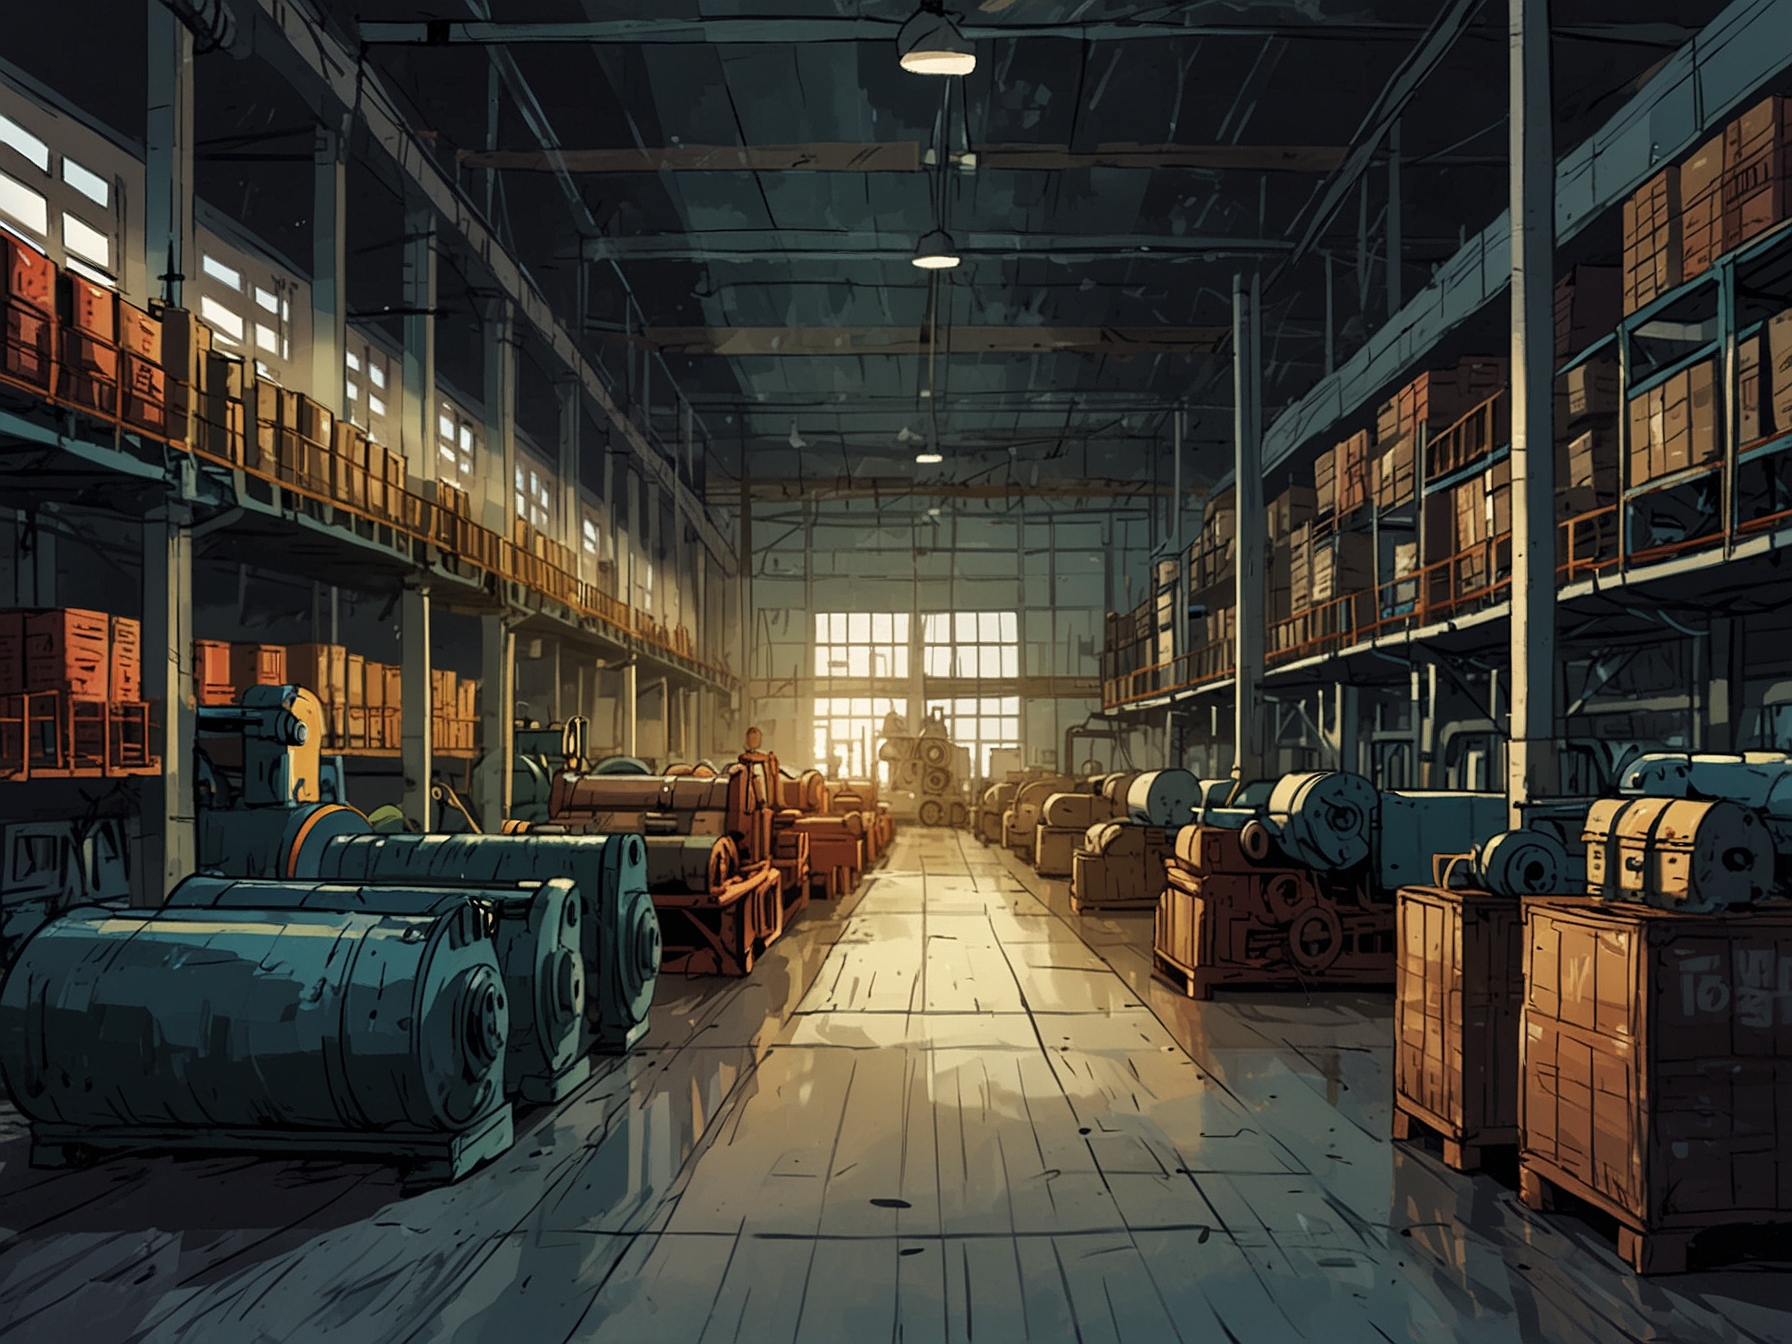 A factory floor with idle machinery and stacked inventory, symbolizing the slowdown in manufacturing activity due to rising costs and supply chain issues.